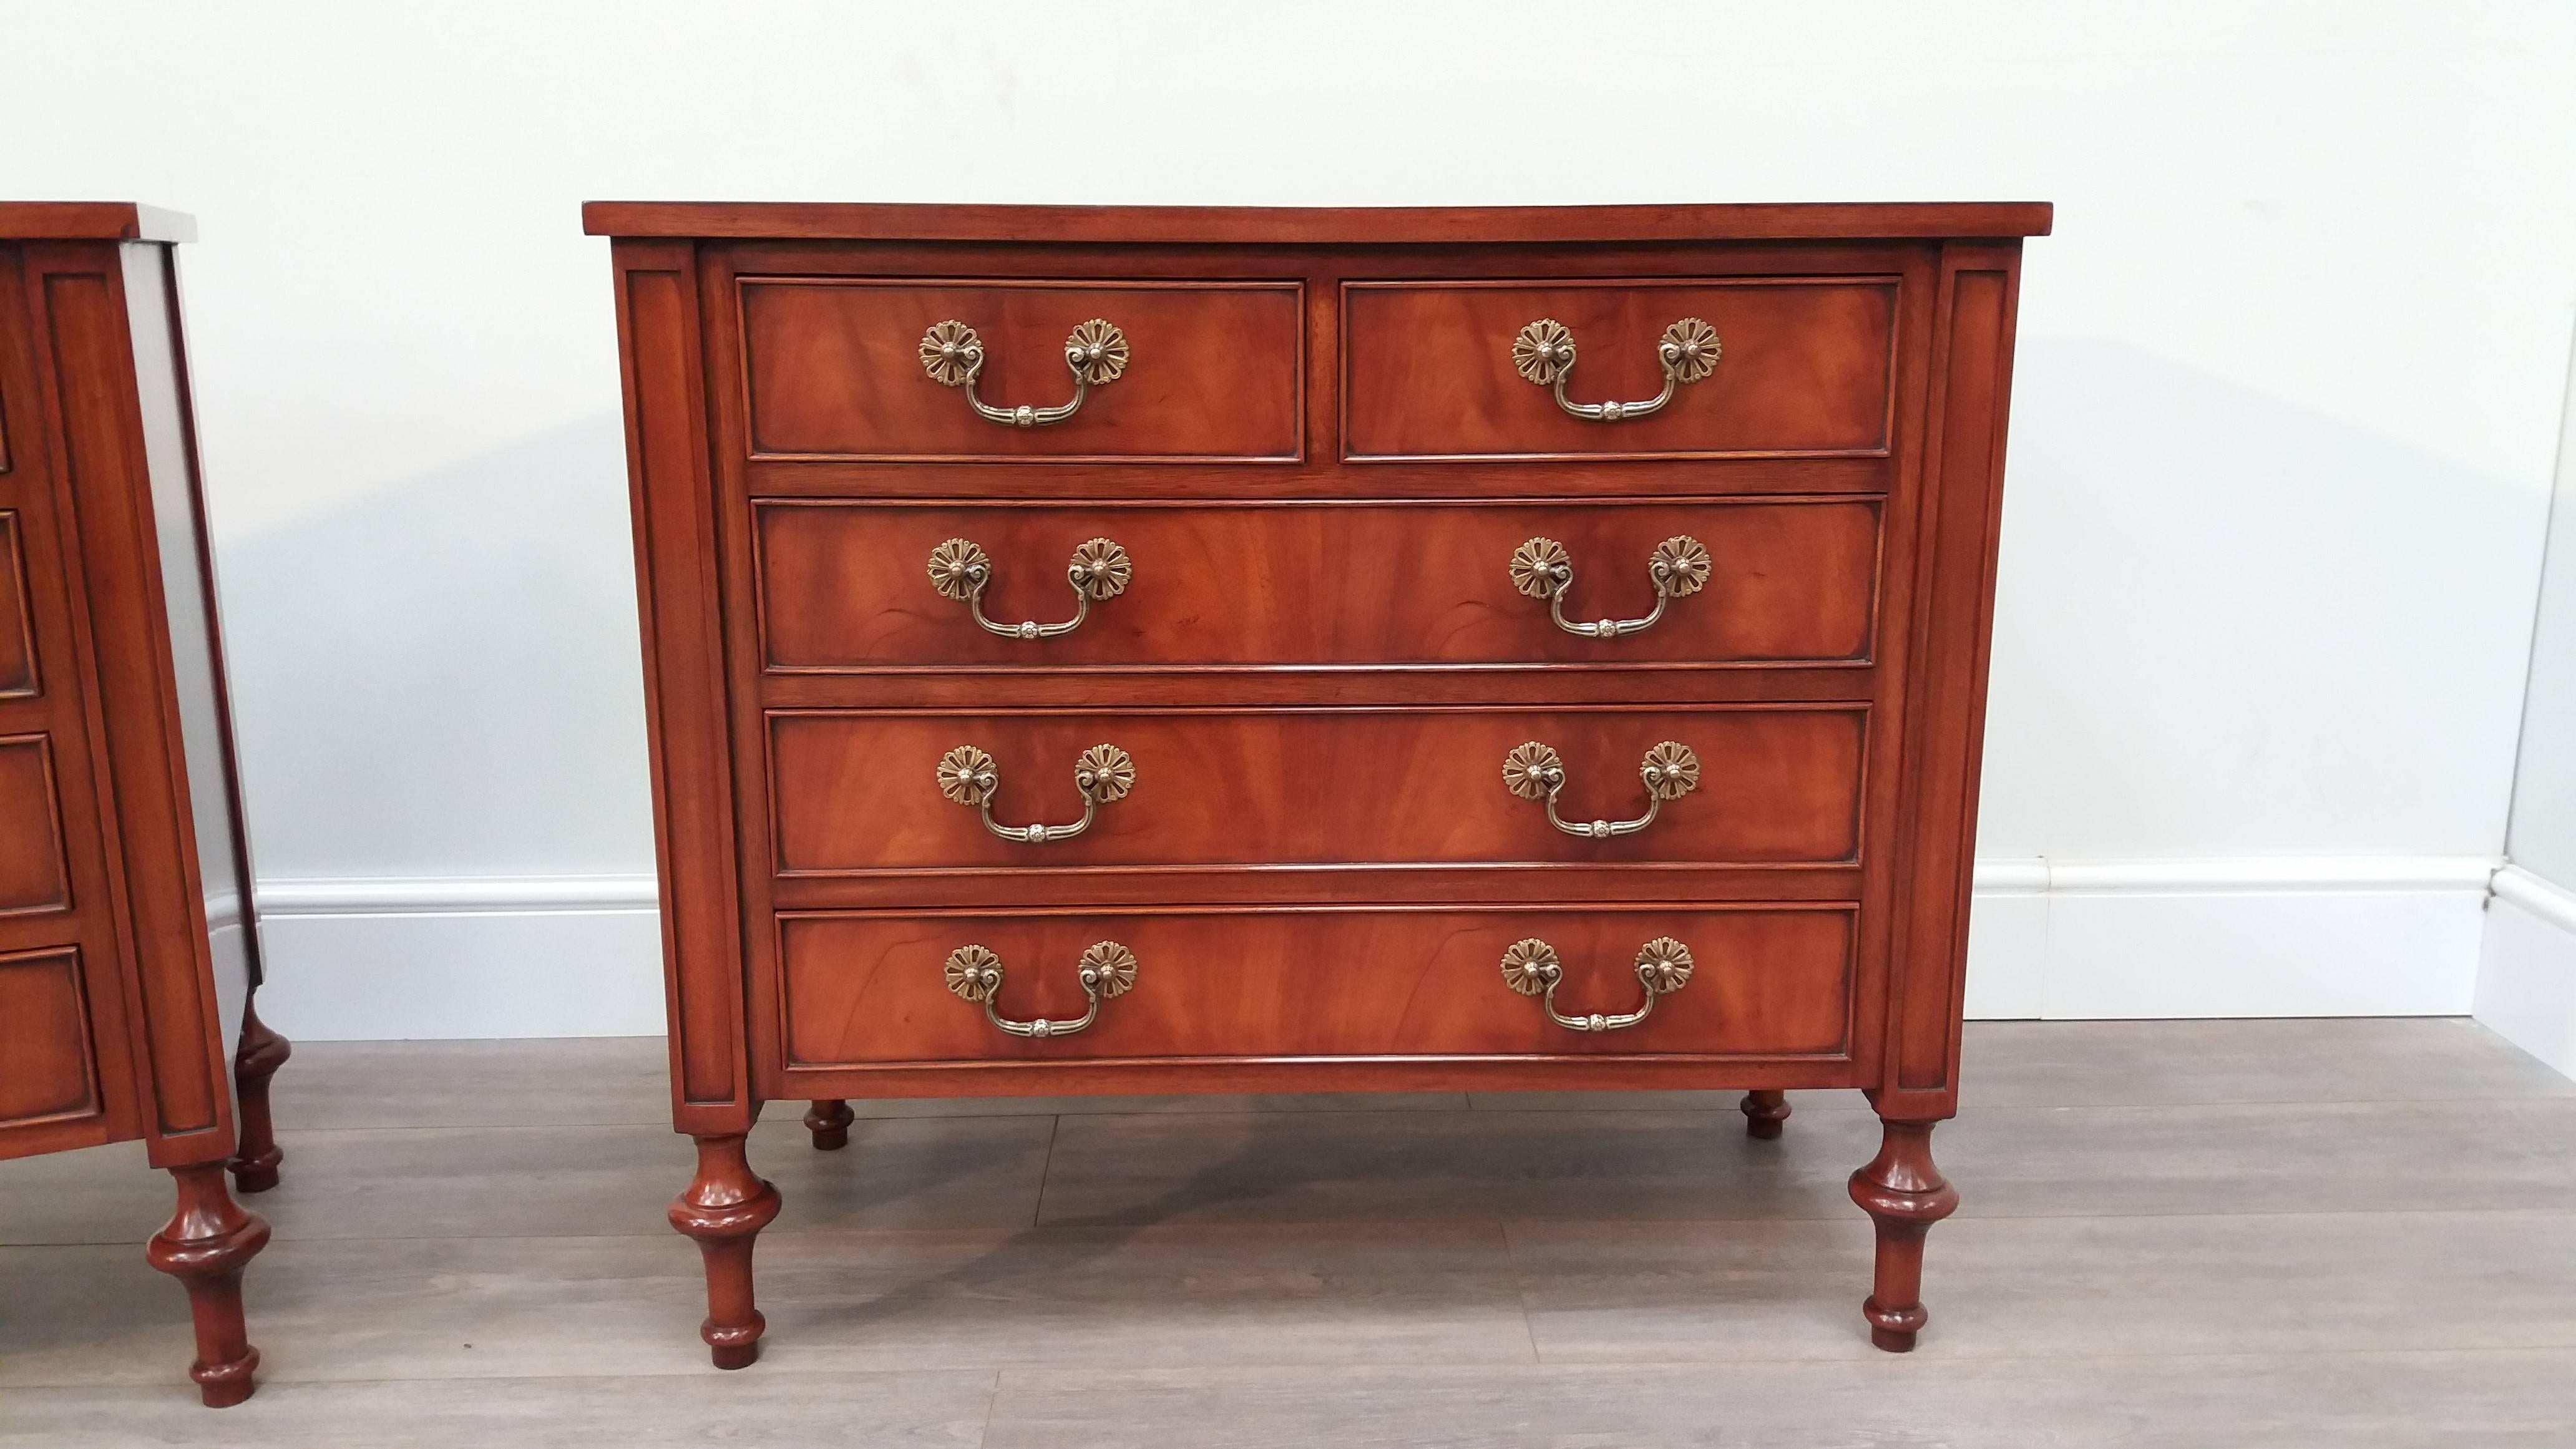 Two similar figured mahogany bedside chests sitting on turned solid mahogany legs.  Featuring two short drawers over four long drawers with brass handles.

Featuring figured mahogany top and brass handles. Supported by four hand-turned mahogany